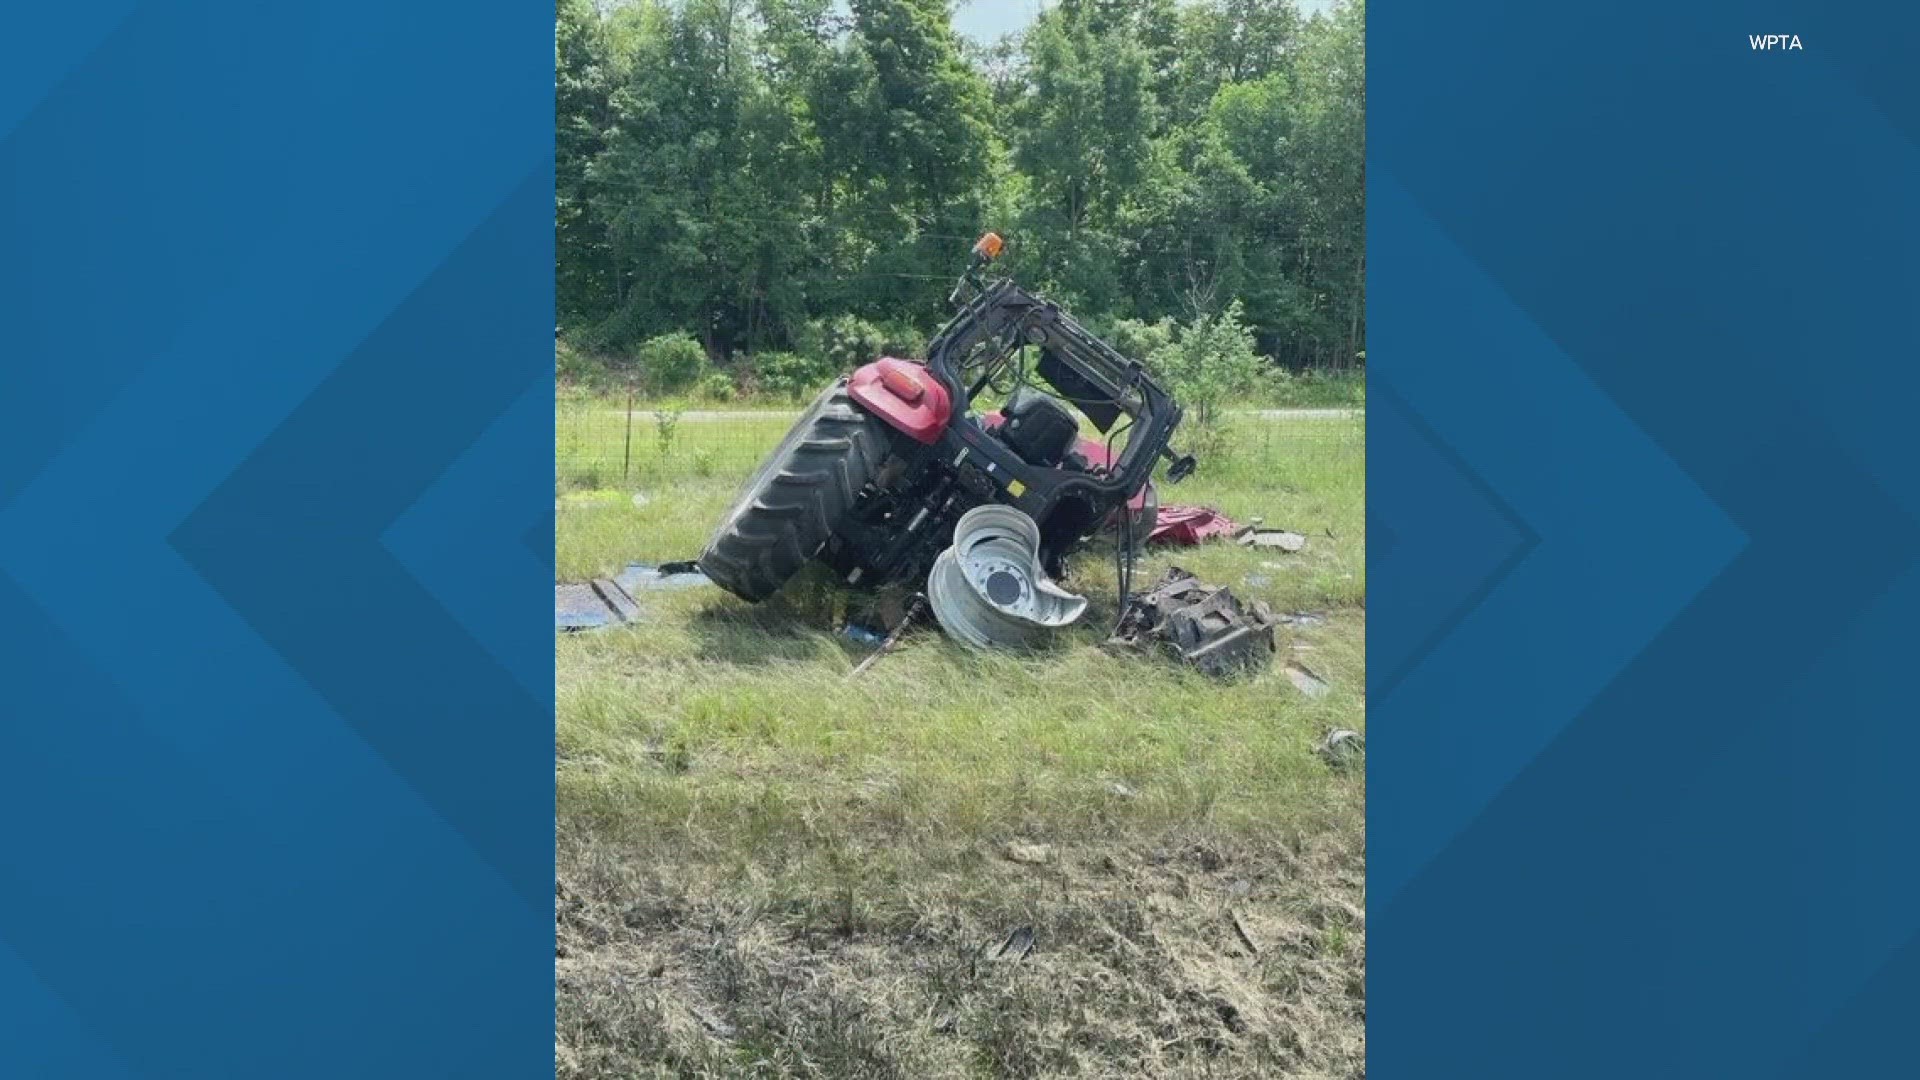 The crash happened just before noon about three miles north of Auburn, Indiana.